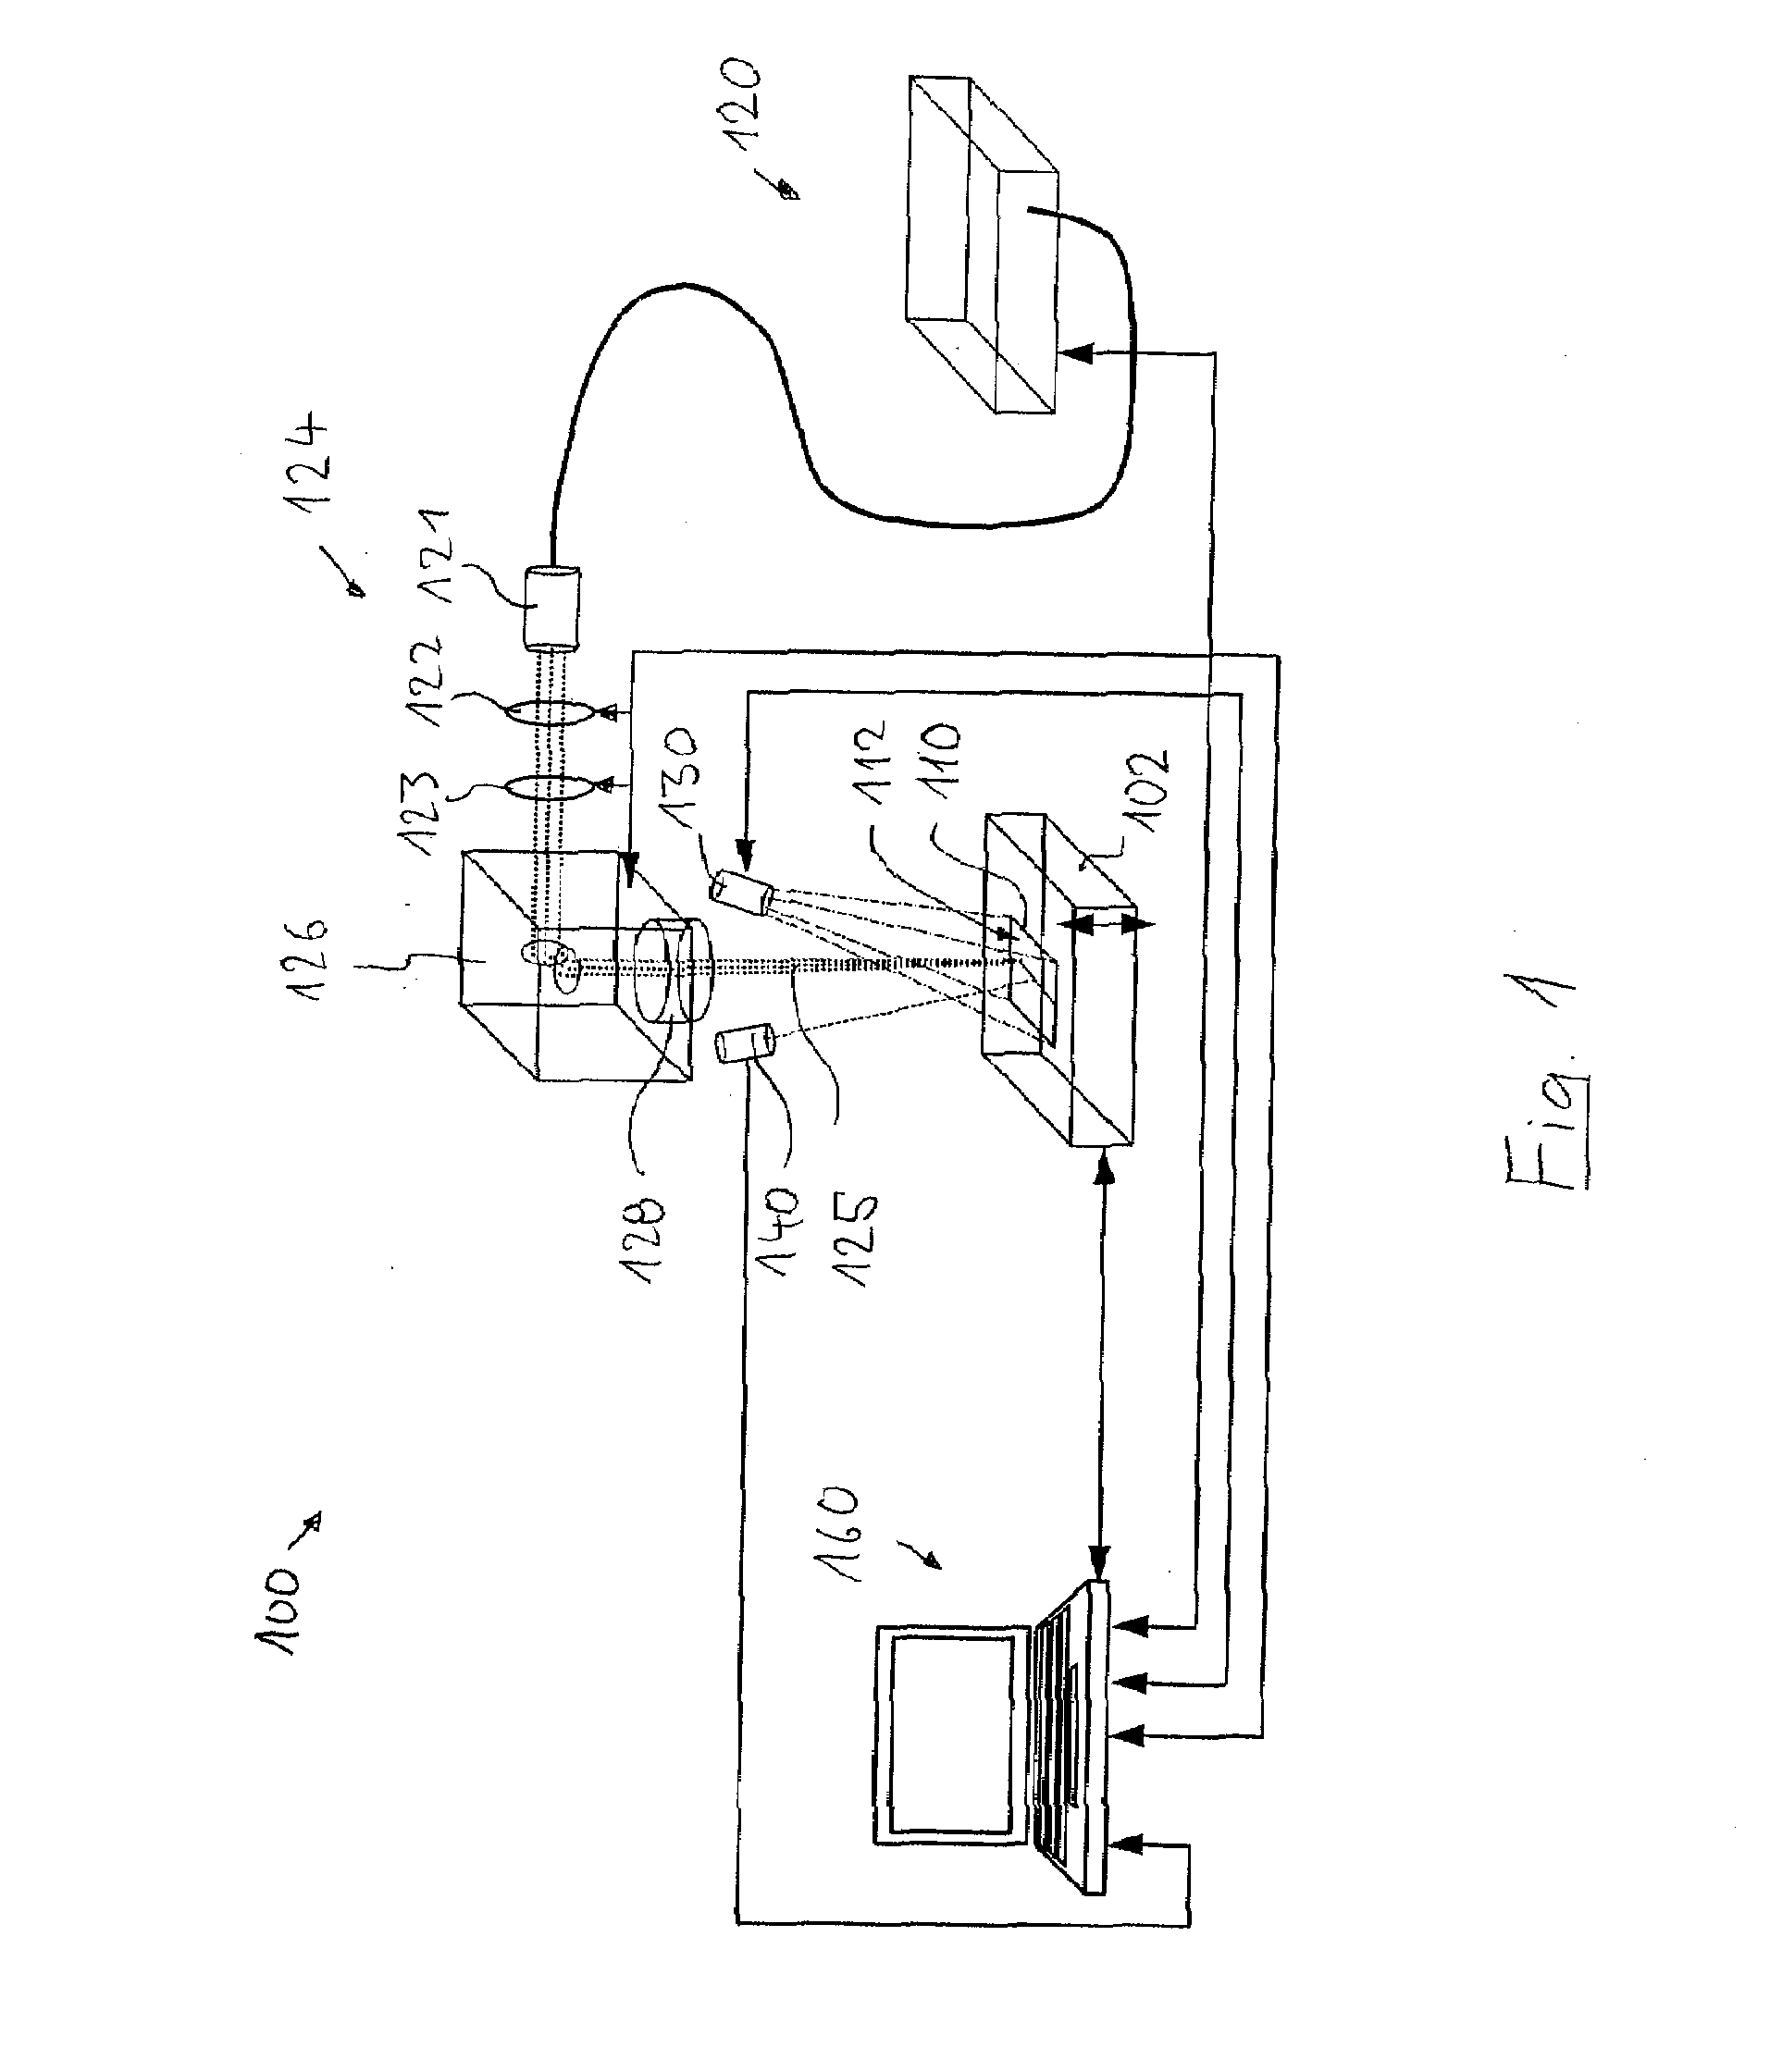 Method and Apparatus for Producing Samples for Transmission Electron Microscopy